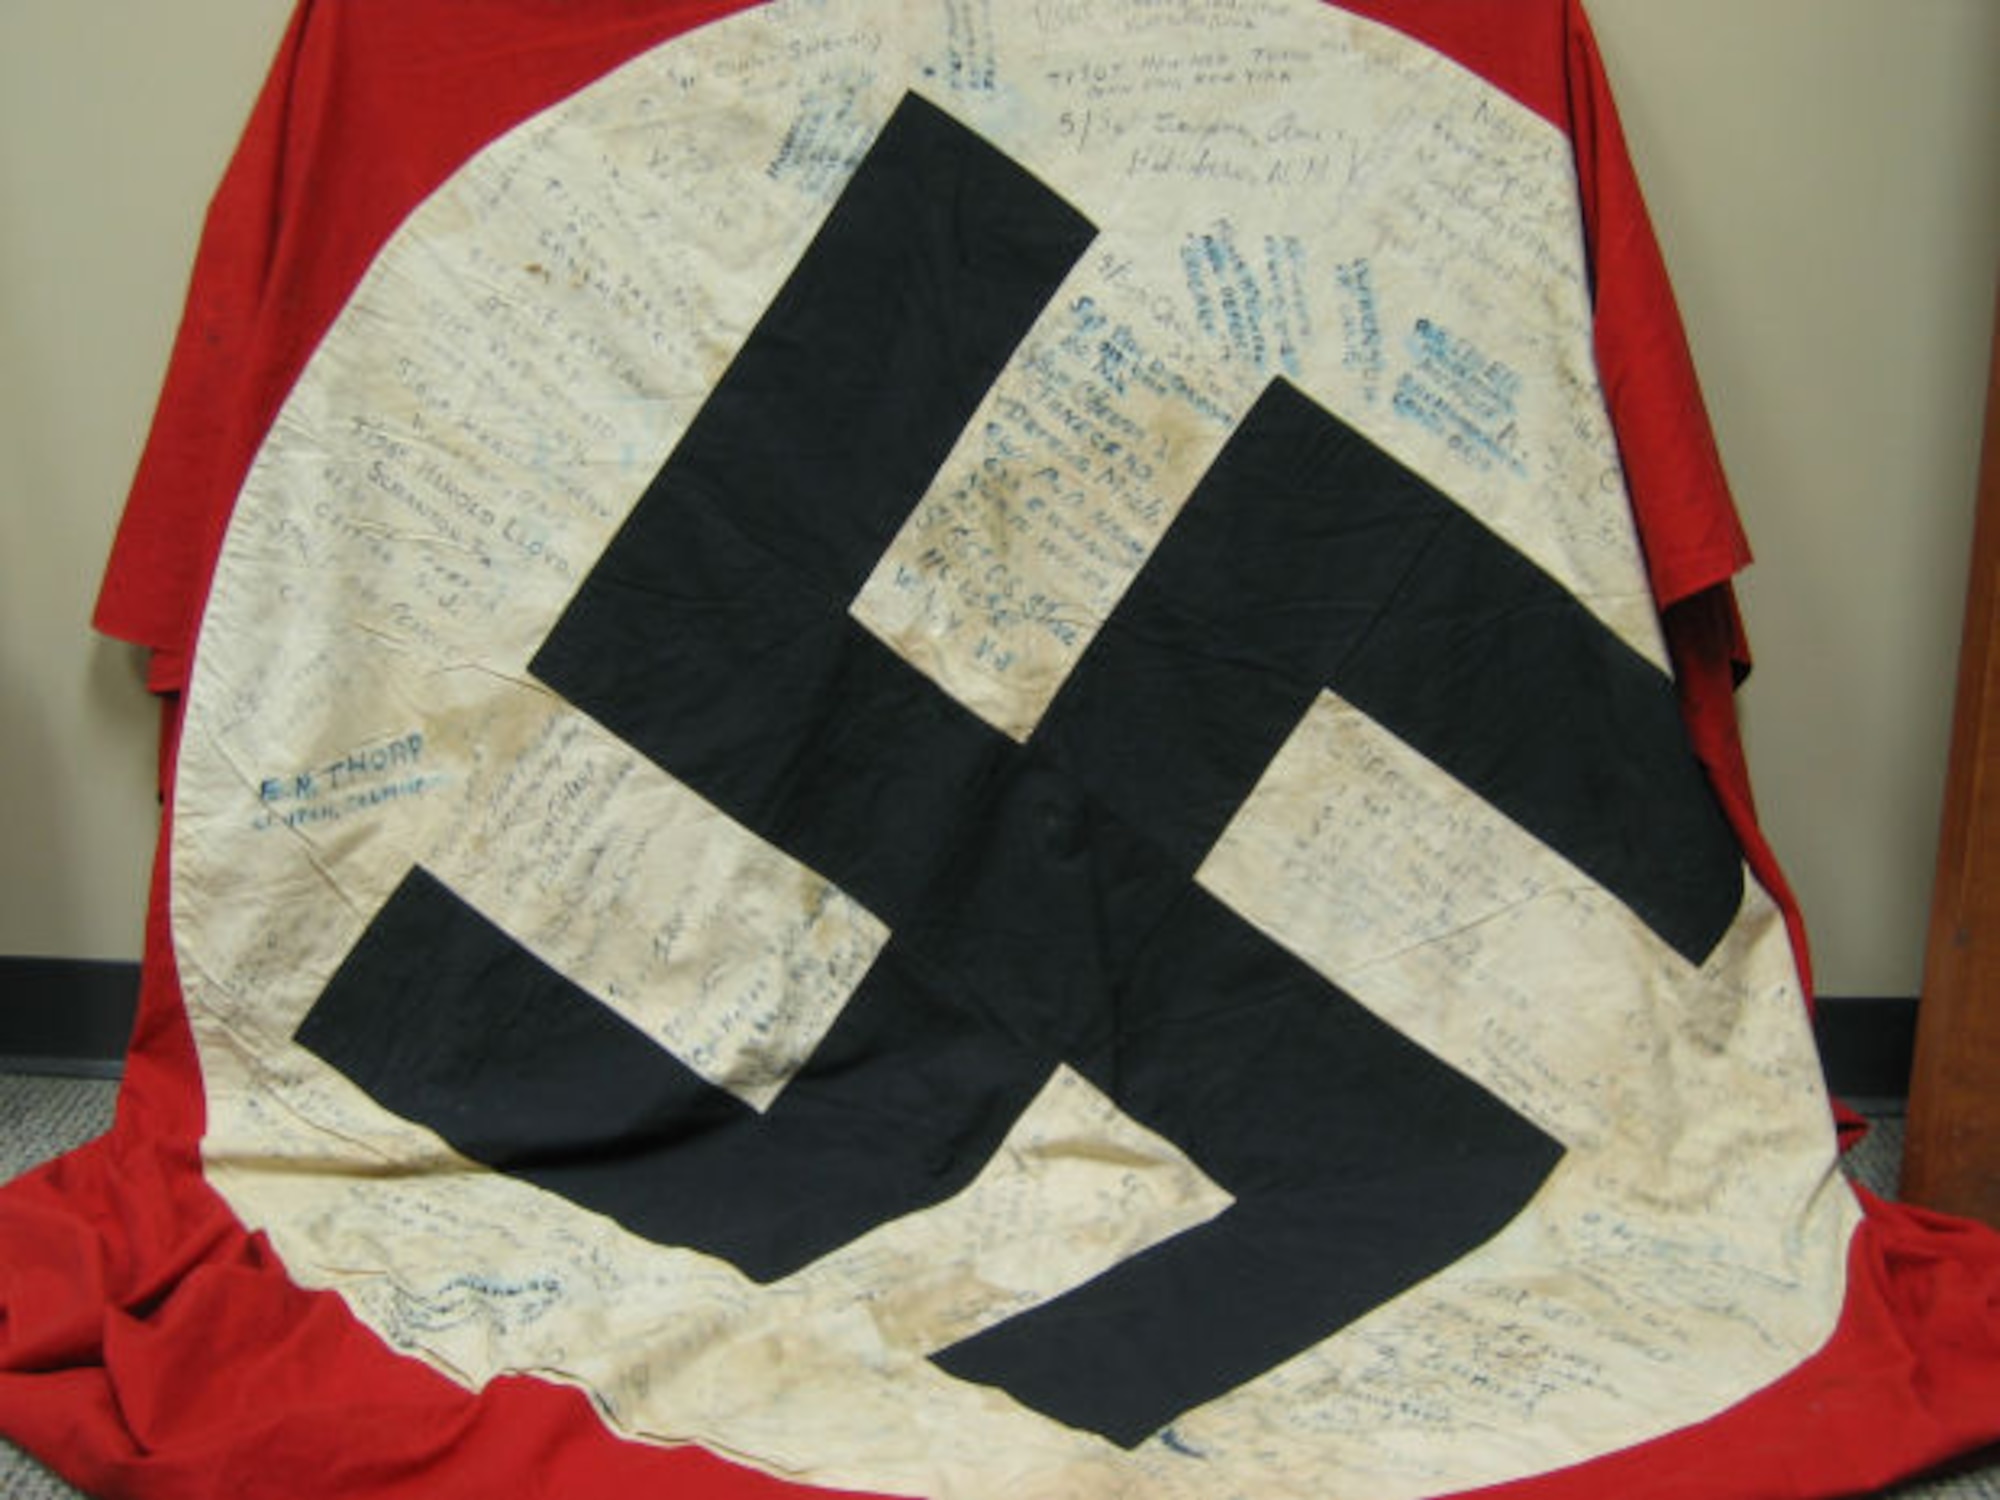 The Moosburg POW flag, which flew over the city hall in Moosburg, Germany, before it was replaced by General Patton’s troops with the American flag in late April, 1945. It was signed by more than 100 former POWs, including Luther P. Canup. (Courtesy 303rd Bomb Group Association)